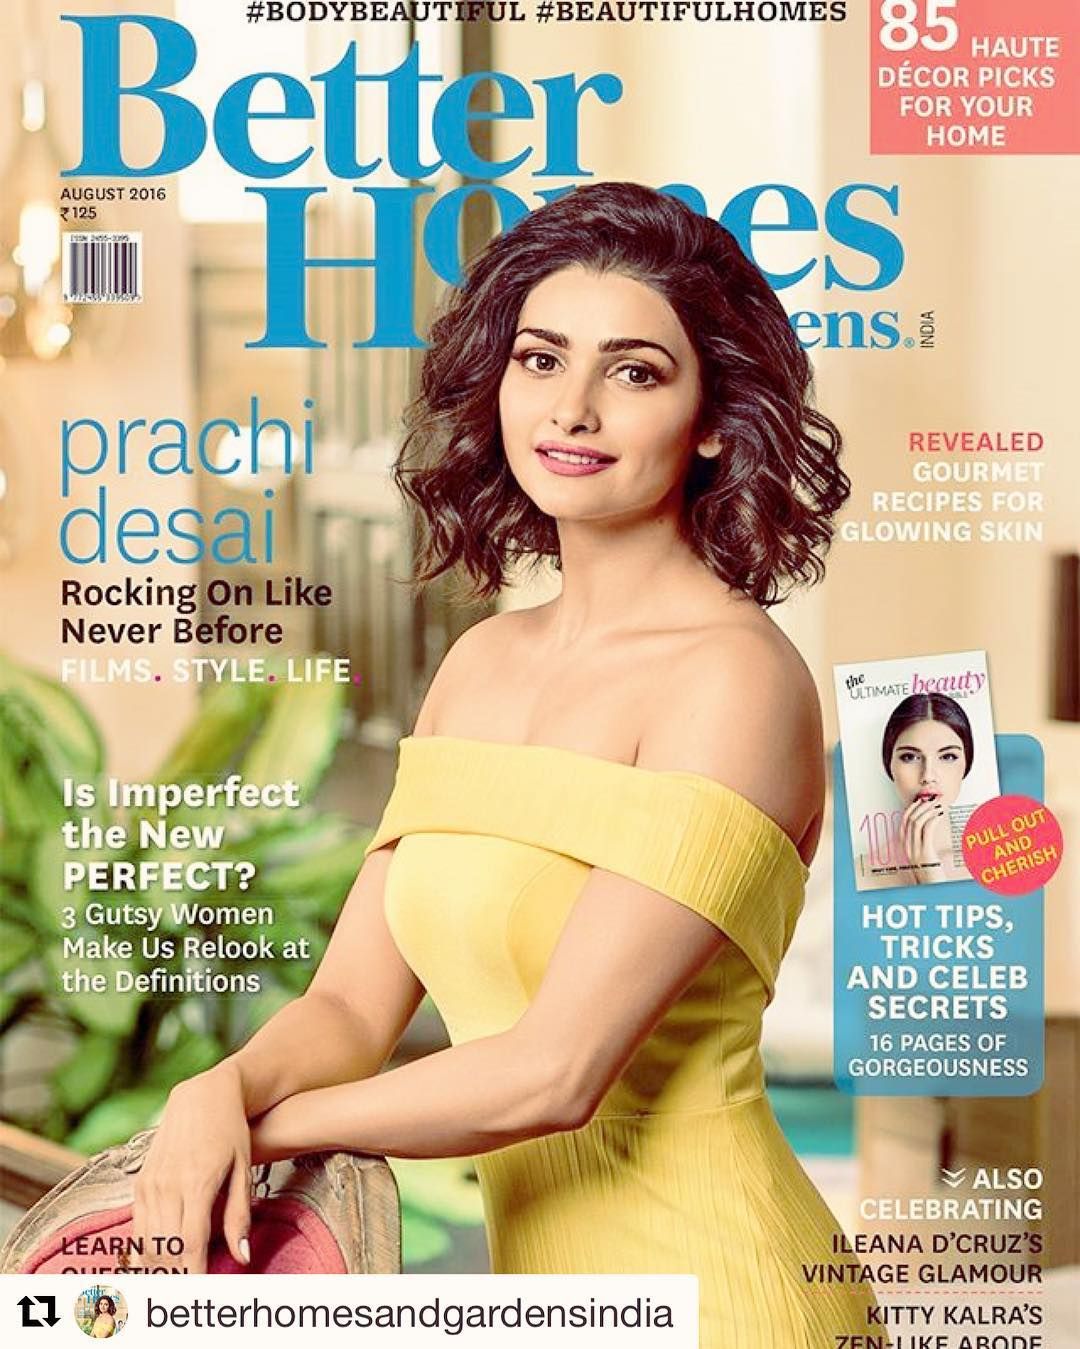 Prachi Desai featured on the cover of Better Homes magazine